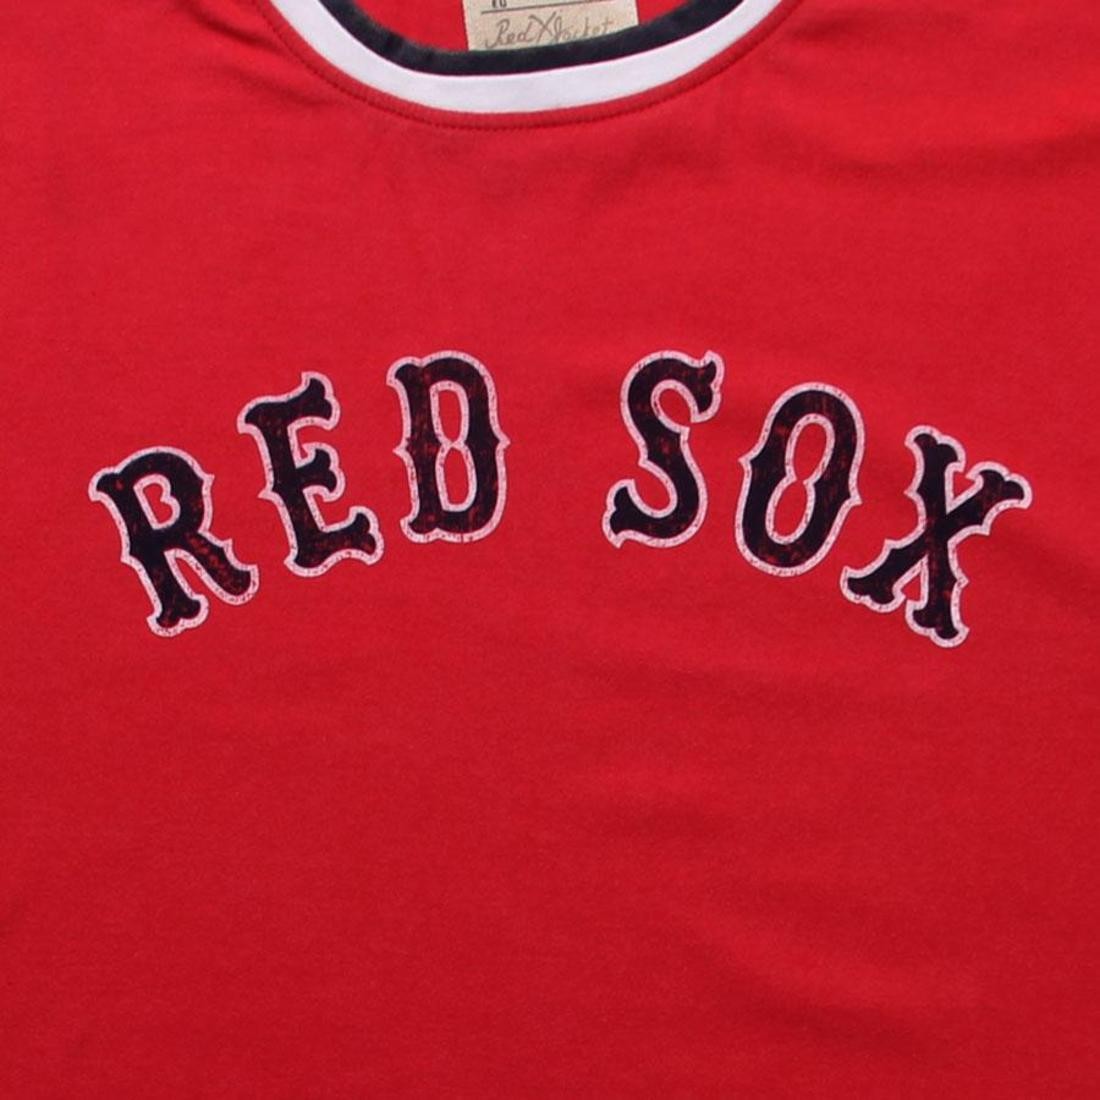 Red Jacket Boston Red Sox Remote Control Tee (red)